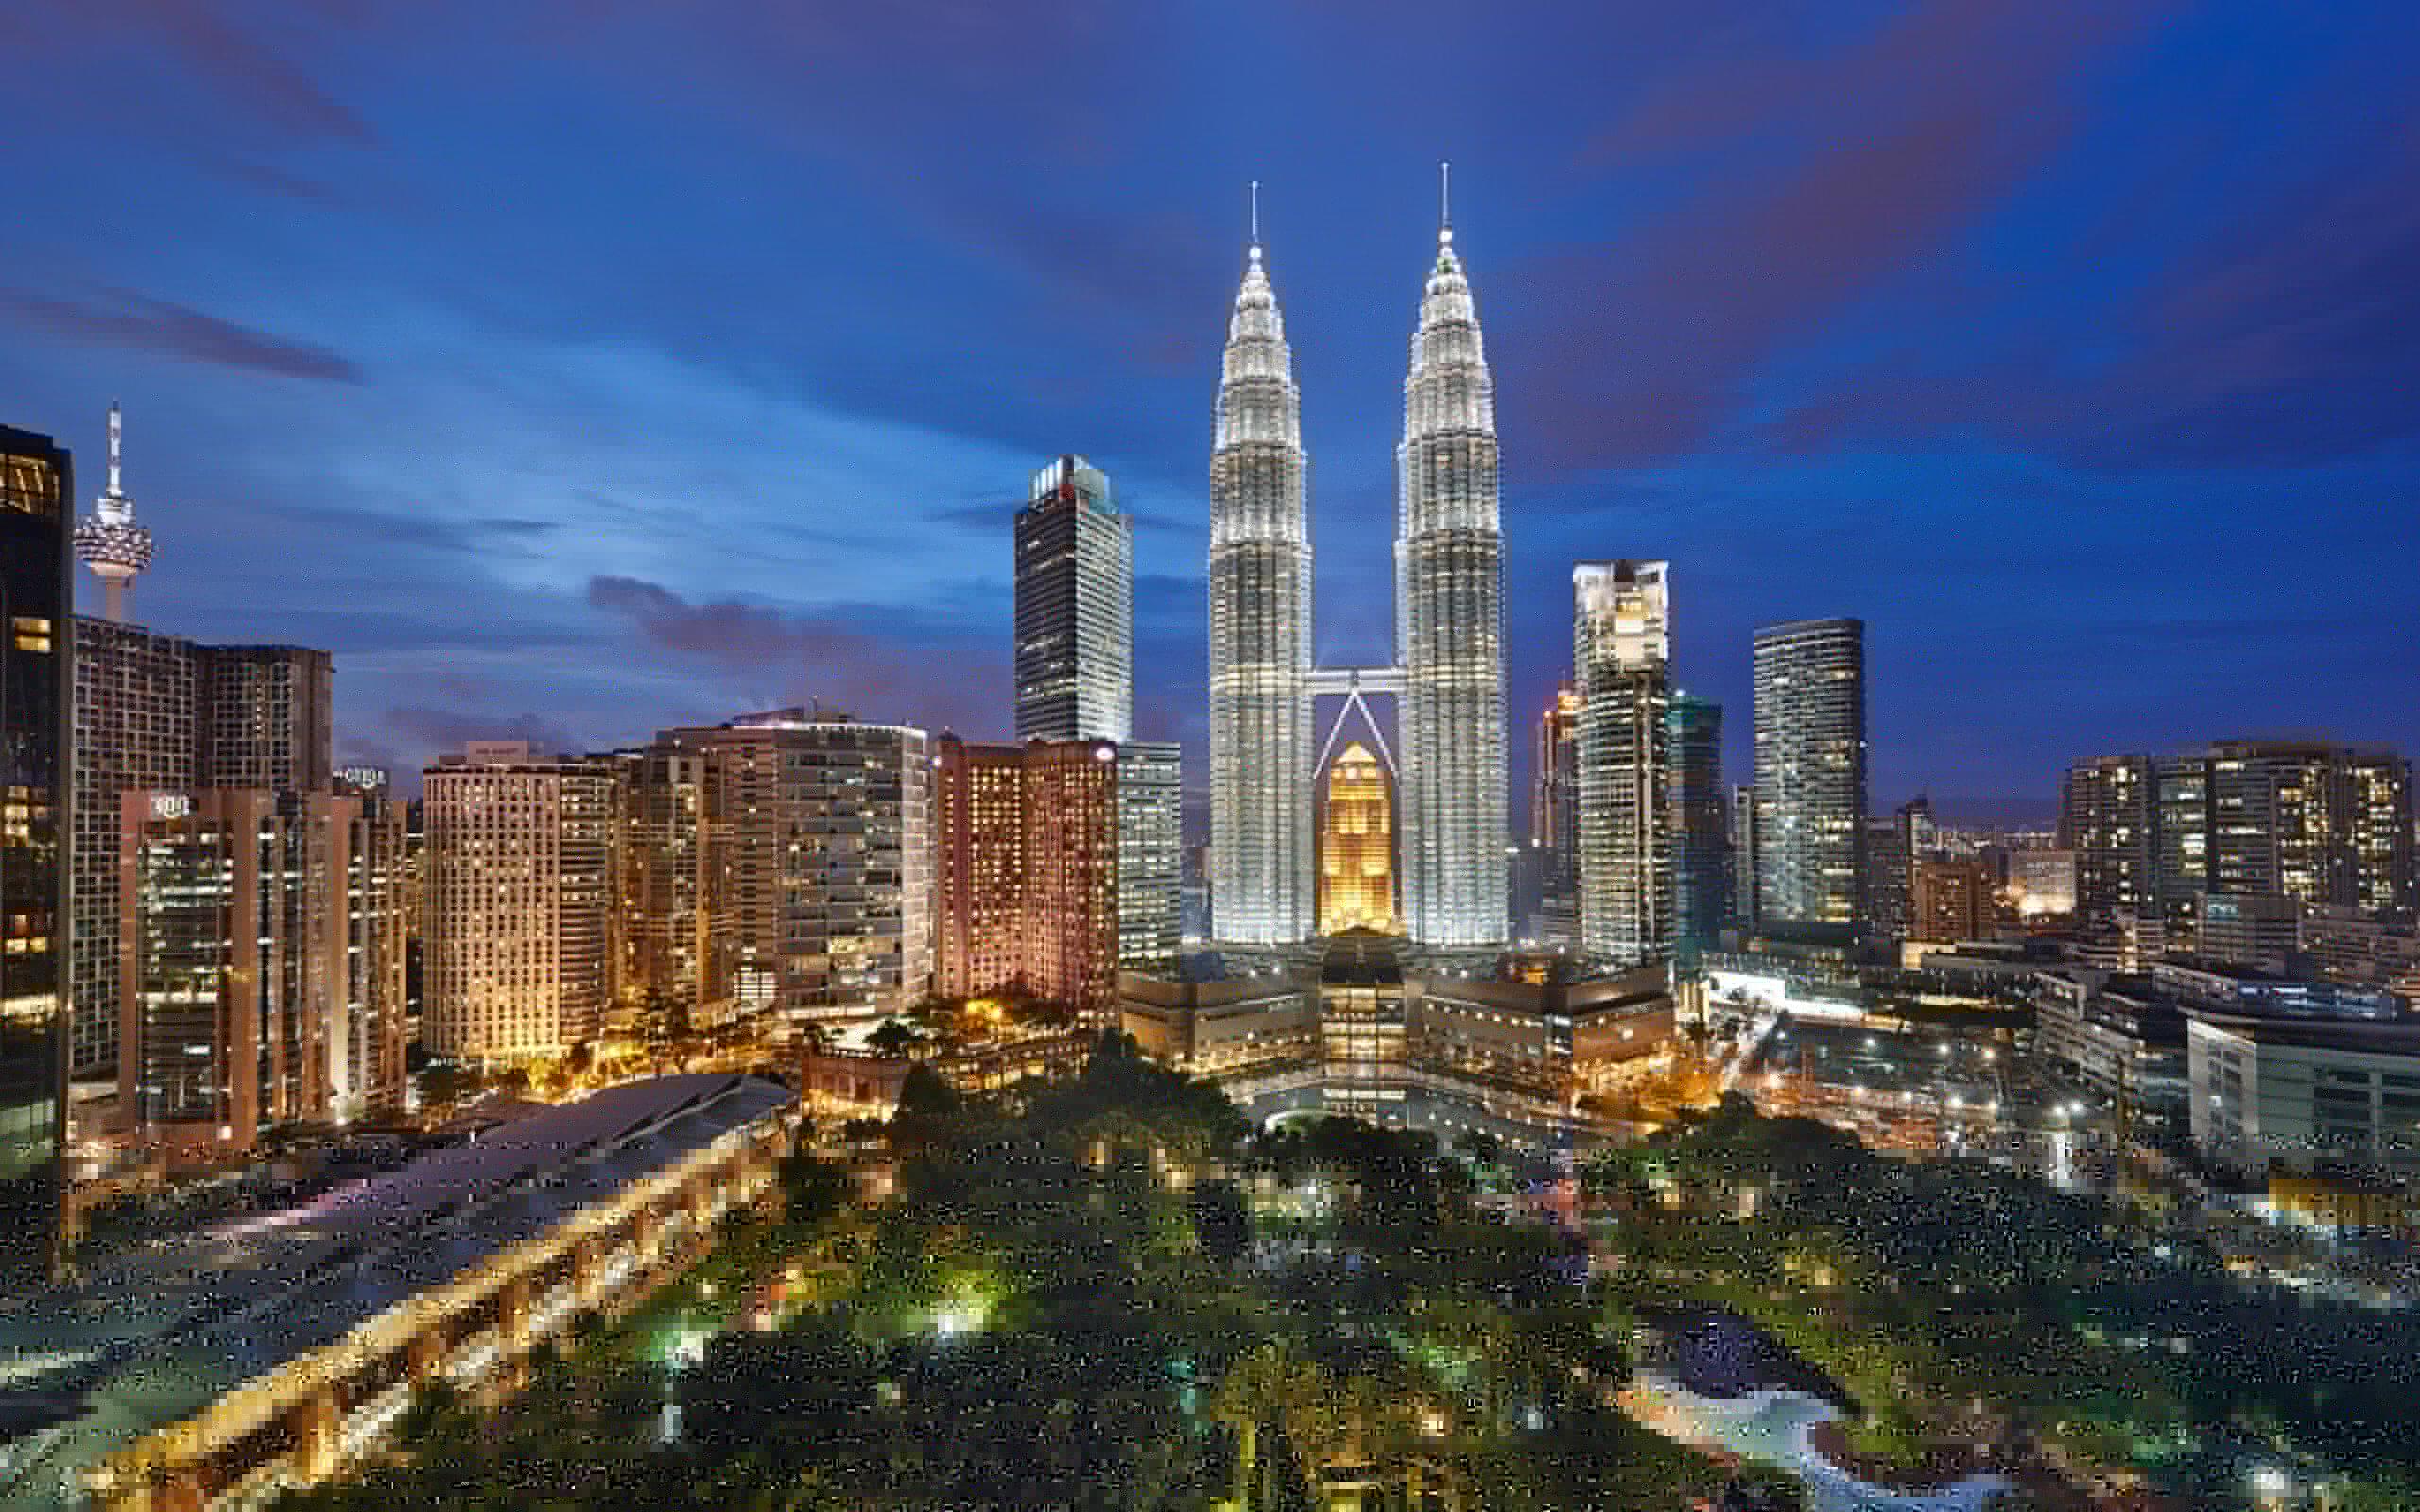 Kuala lumpur 4k ultra hd 16:10 wallpapers hd, desktop backgrounds  3840x2400, images and pictures